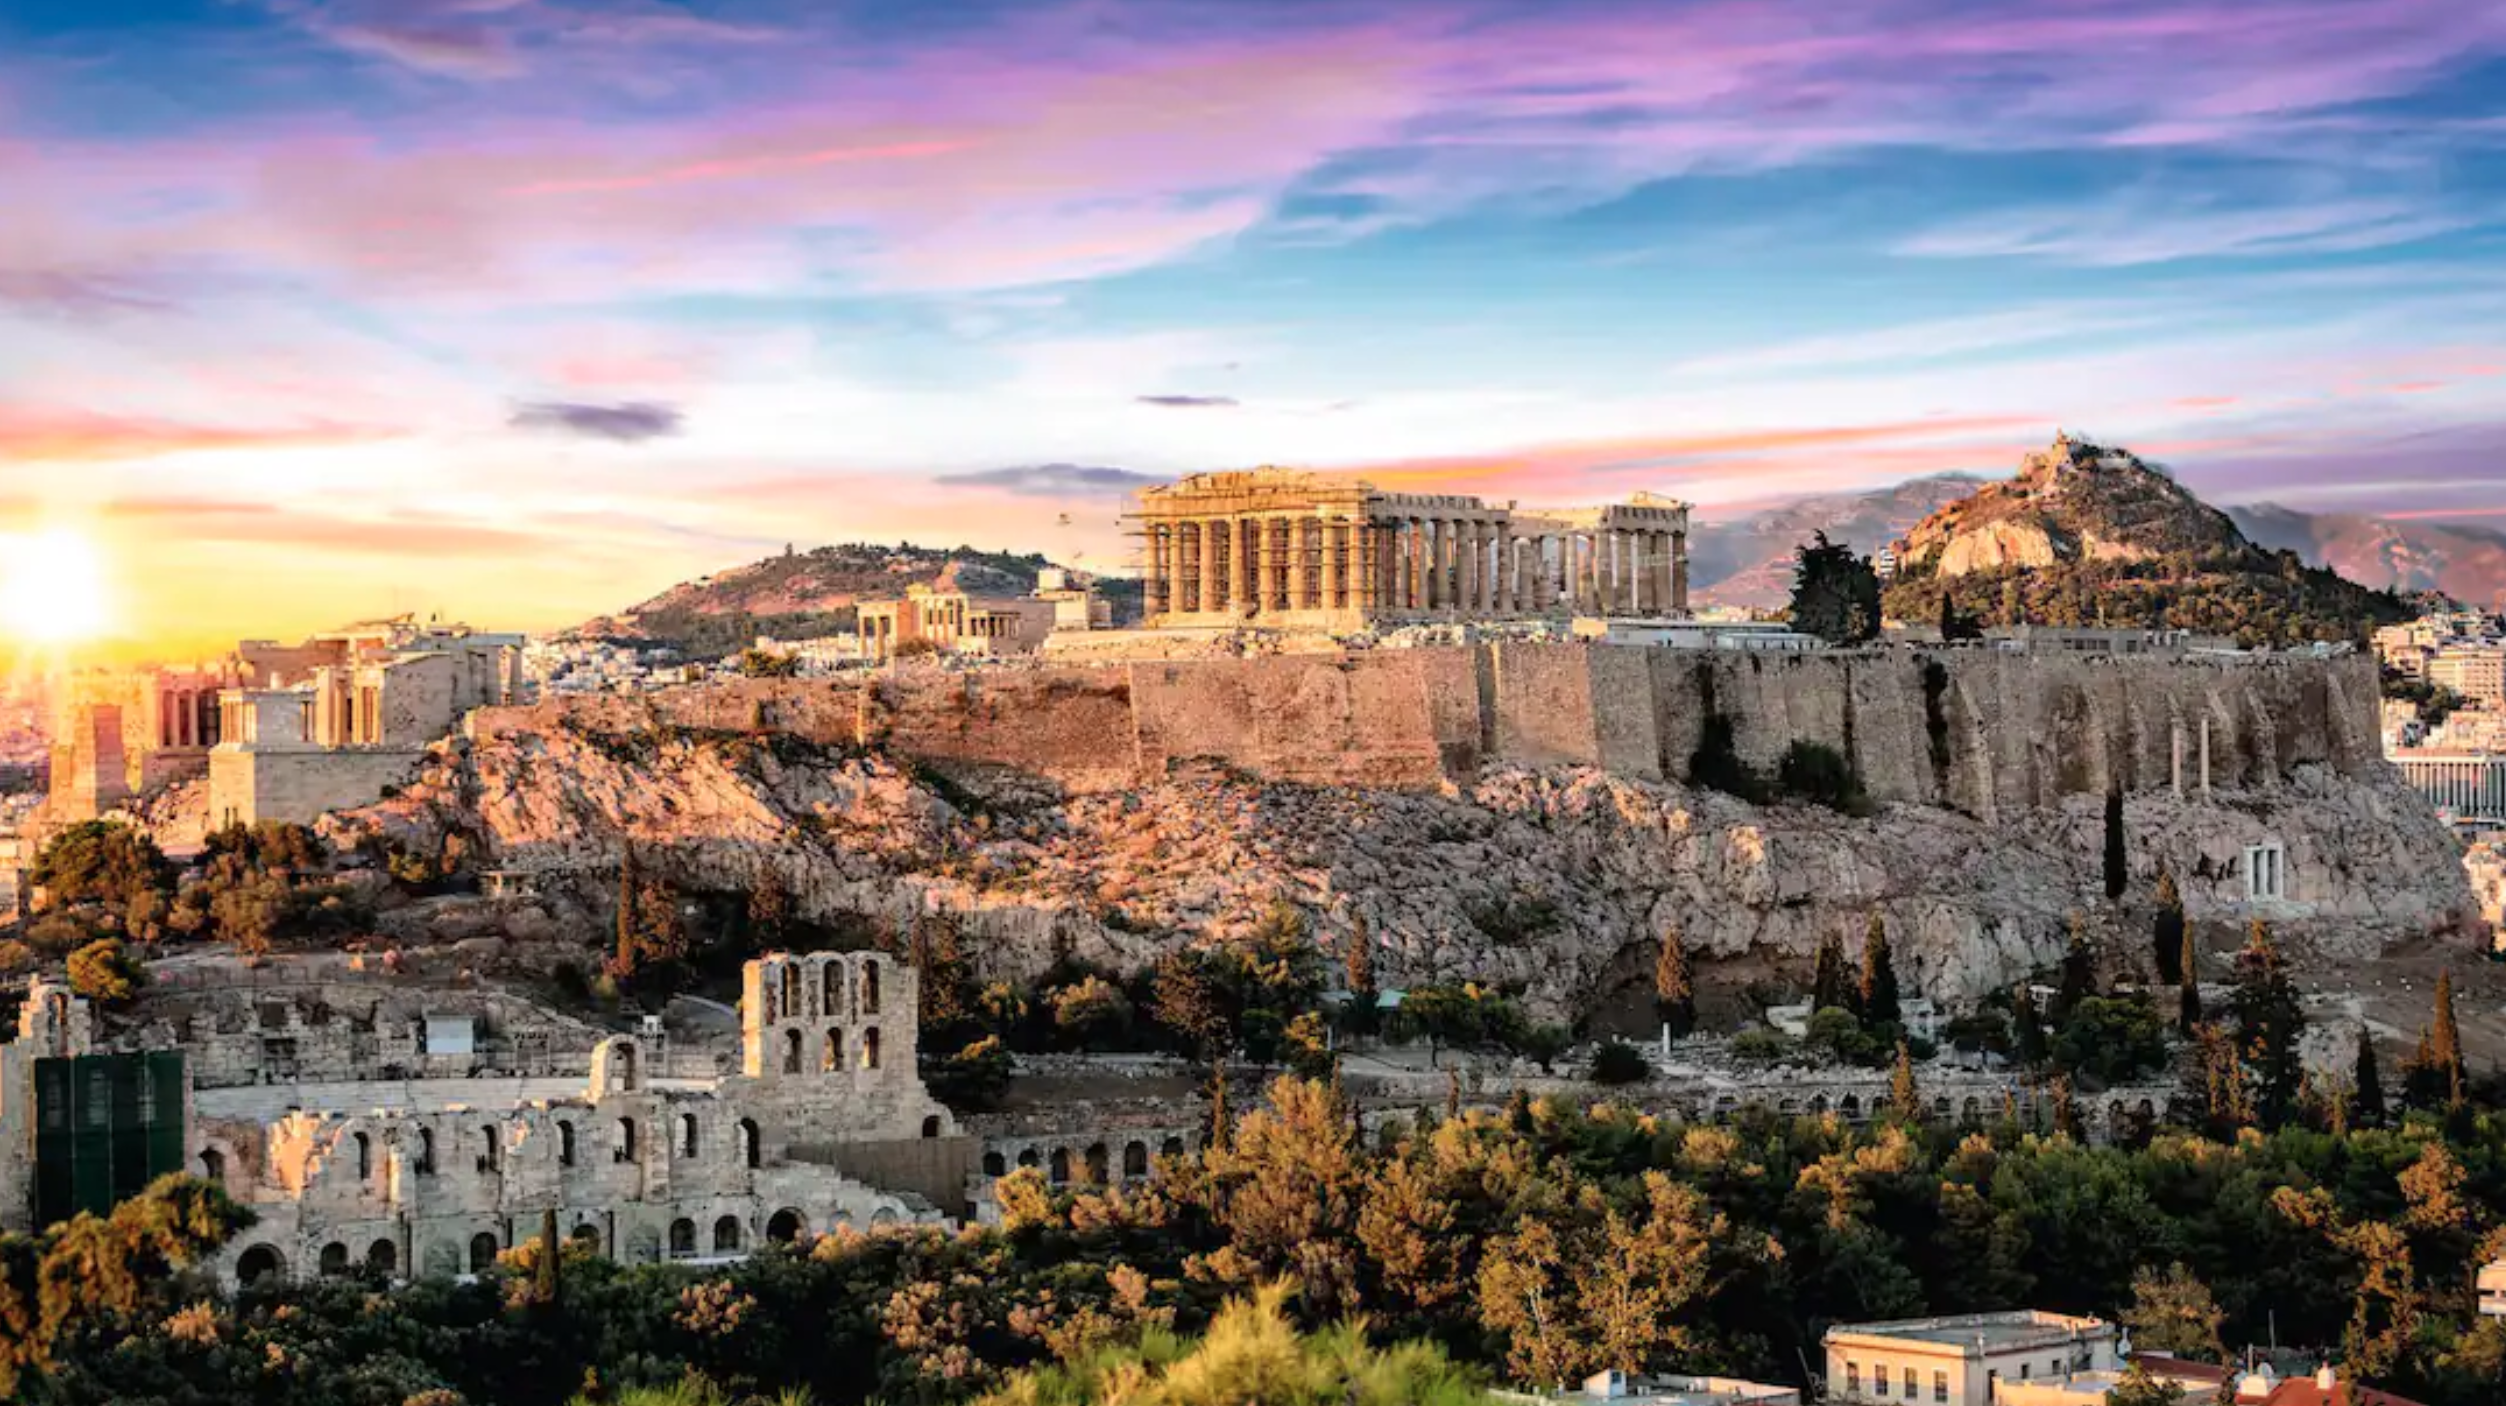 Acropolis and Parthenon aerial view in Athens, Greece